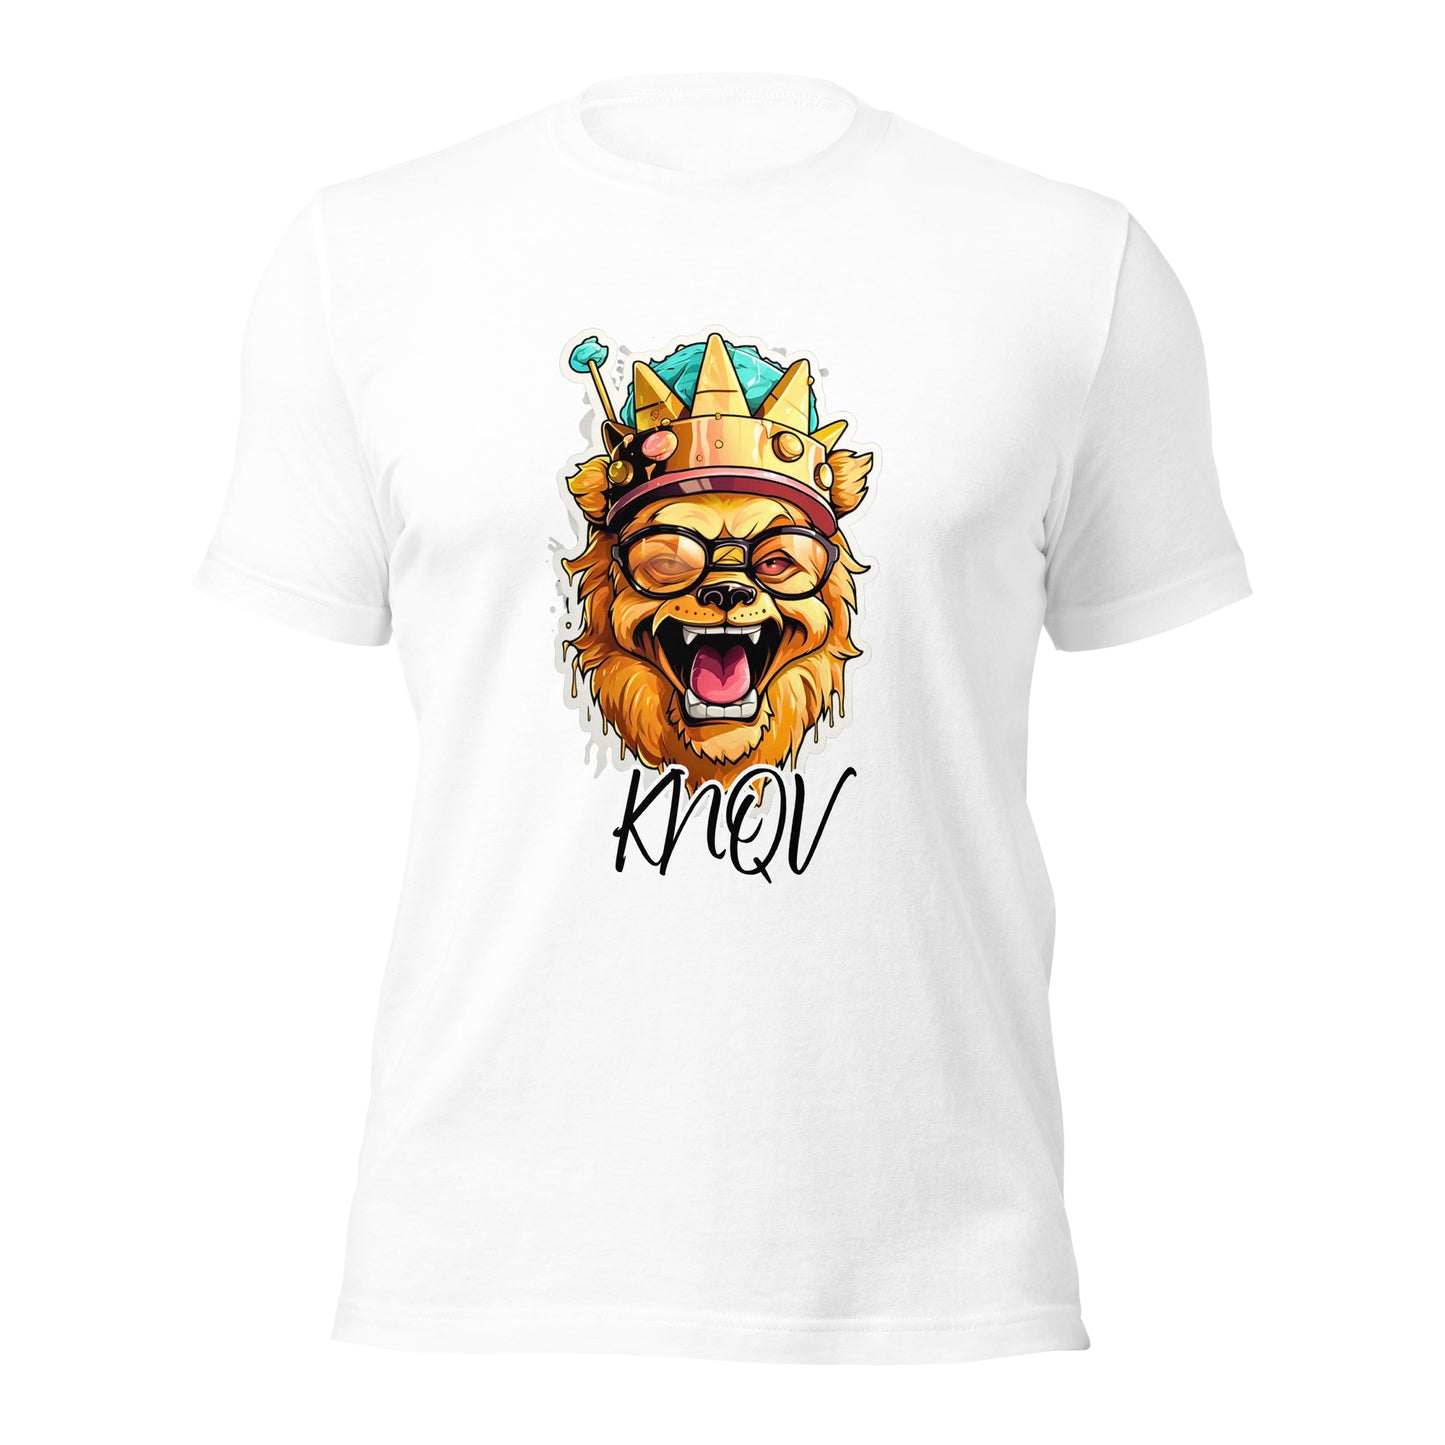 King Lion Crown | Gift, Birthday Gift, Crown, Gift Birthday Love Shirt Matching Shirt for Couples, Couple Shirts, Best Couple Shirts, Lovers Shirt